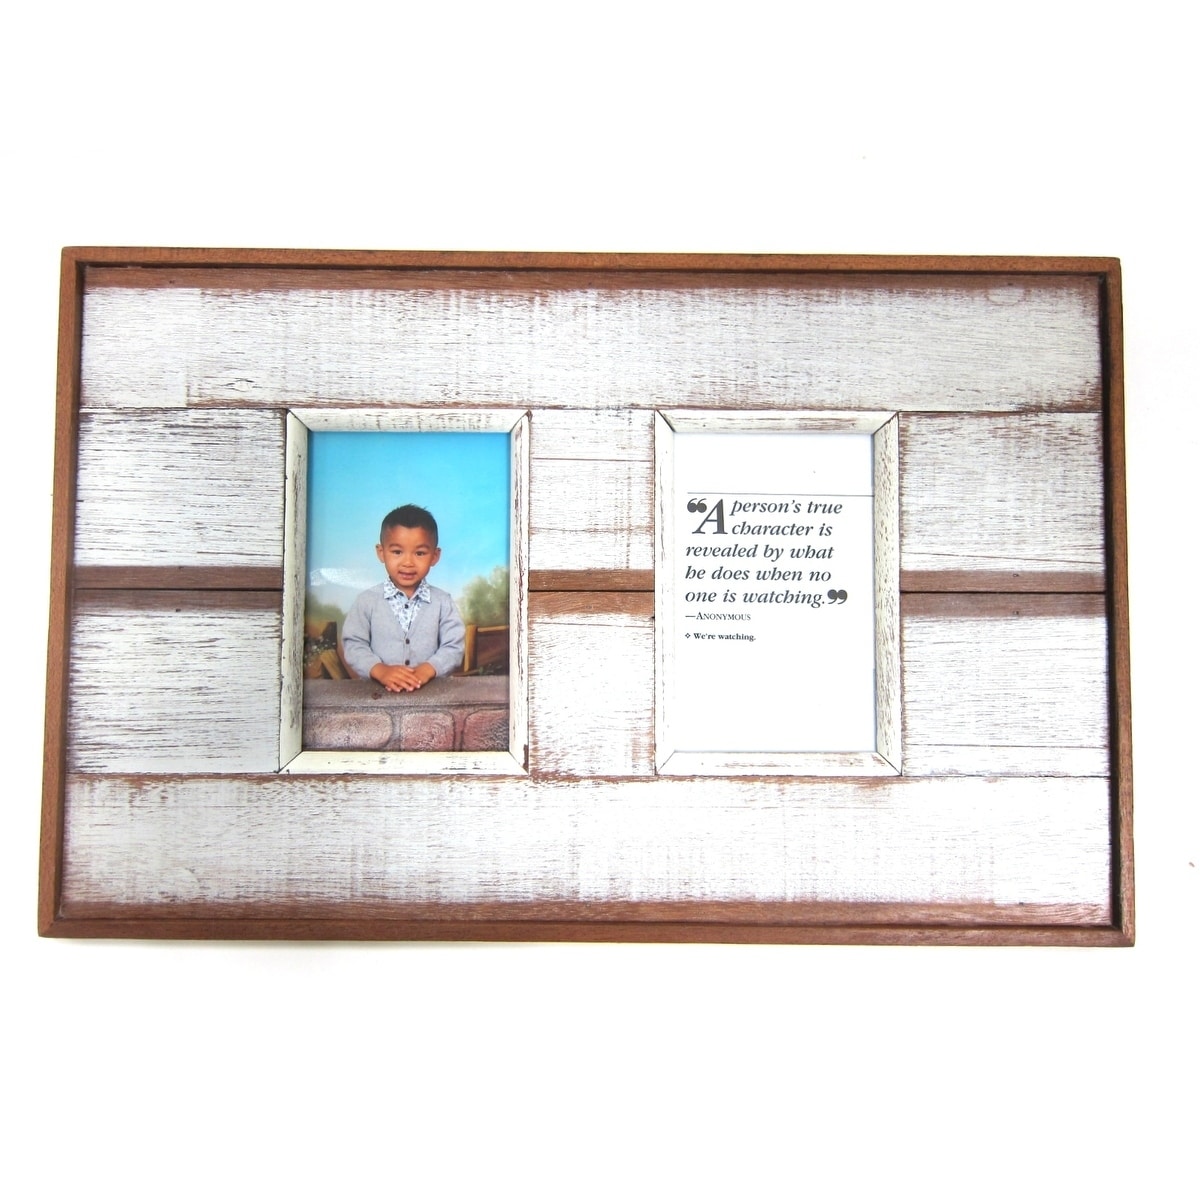 https://ak1.ostkcdn.com/images/products/28228358/Recycled-Wood-White-Double-4x6-Shabby-Picture-Frame-N-A-3b6f838b-1356-4e32-8c14-a30137c35770.jpg